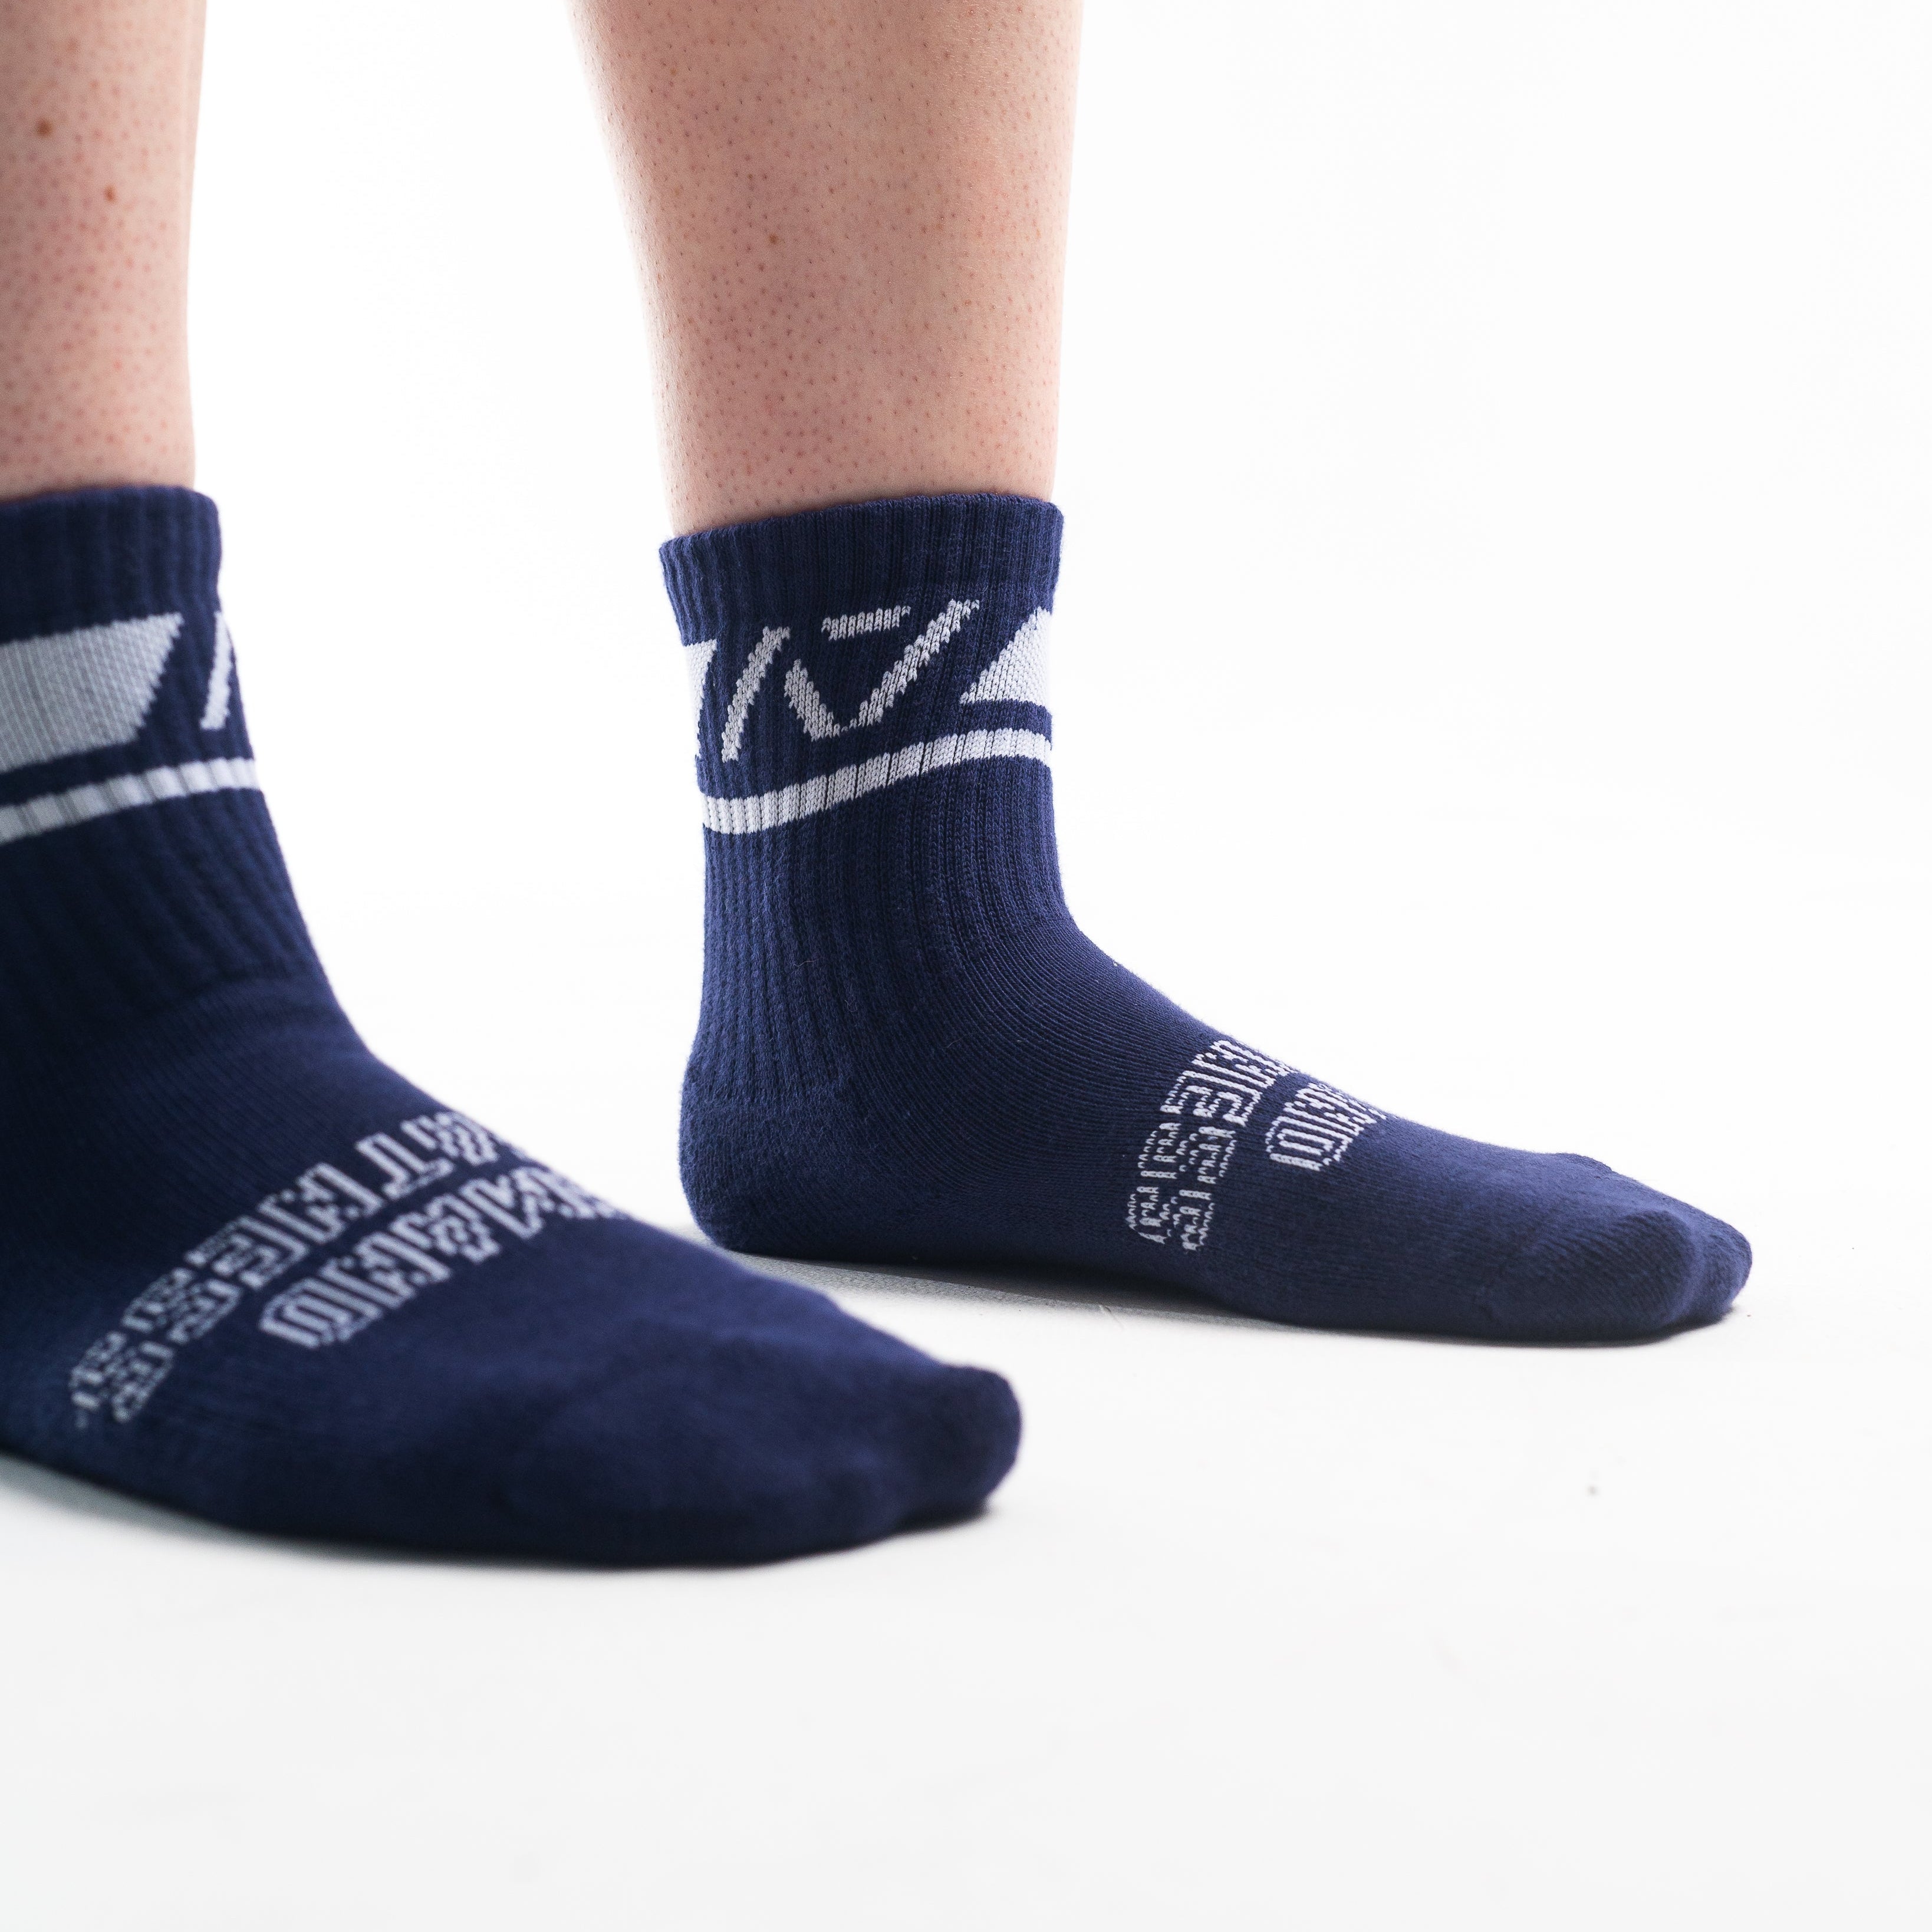 A7 Night Light Crew socks showcase white and blue logos to let your energy show on the platform, in your training or while out and about. The IPF Approved Shadow Stone Meet Kit includes Powerlifting Singlet, A7 Meet Shirt, A7 Zebra Wrist Wraps, A7 Deadlift Socks, Hourglass Knee Sleeves (Stiff Knee Sleeves and Rigor Mortis Knee Sleeves). Genouillères powerlifting shipping to France, Spain, Ireland, Germany, Italy, Sweden and EU.